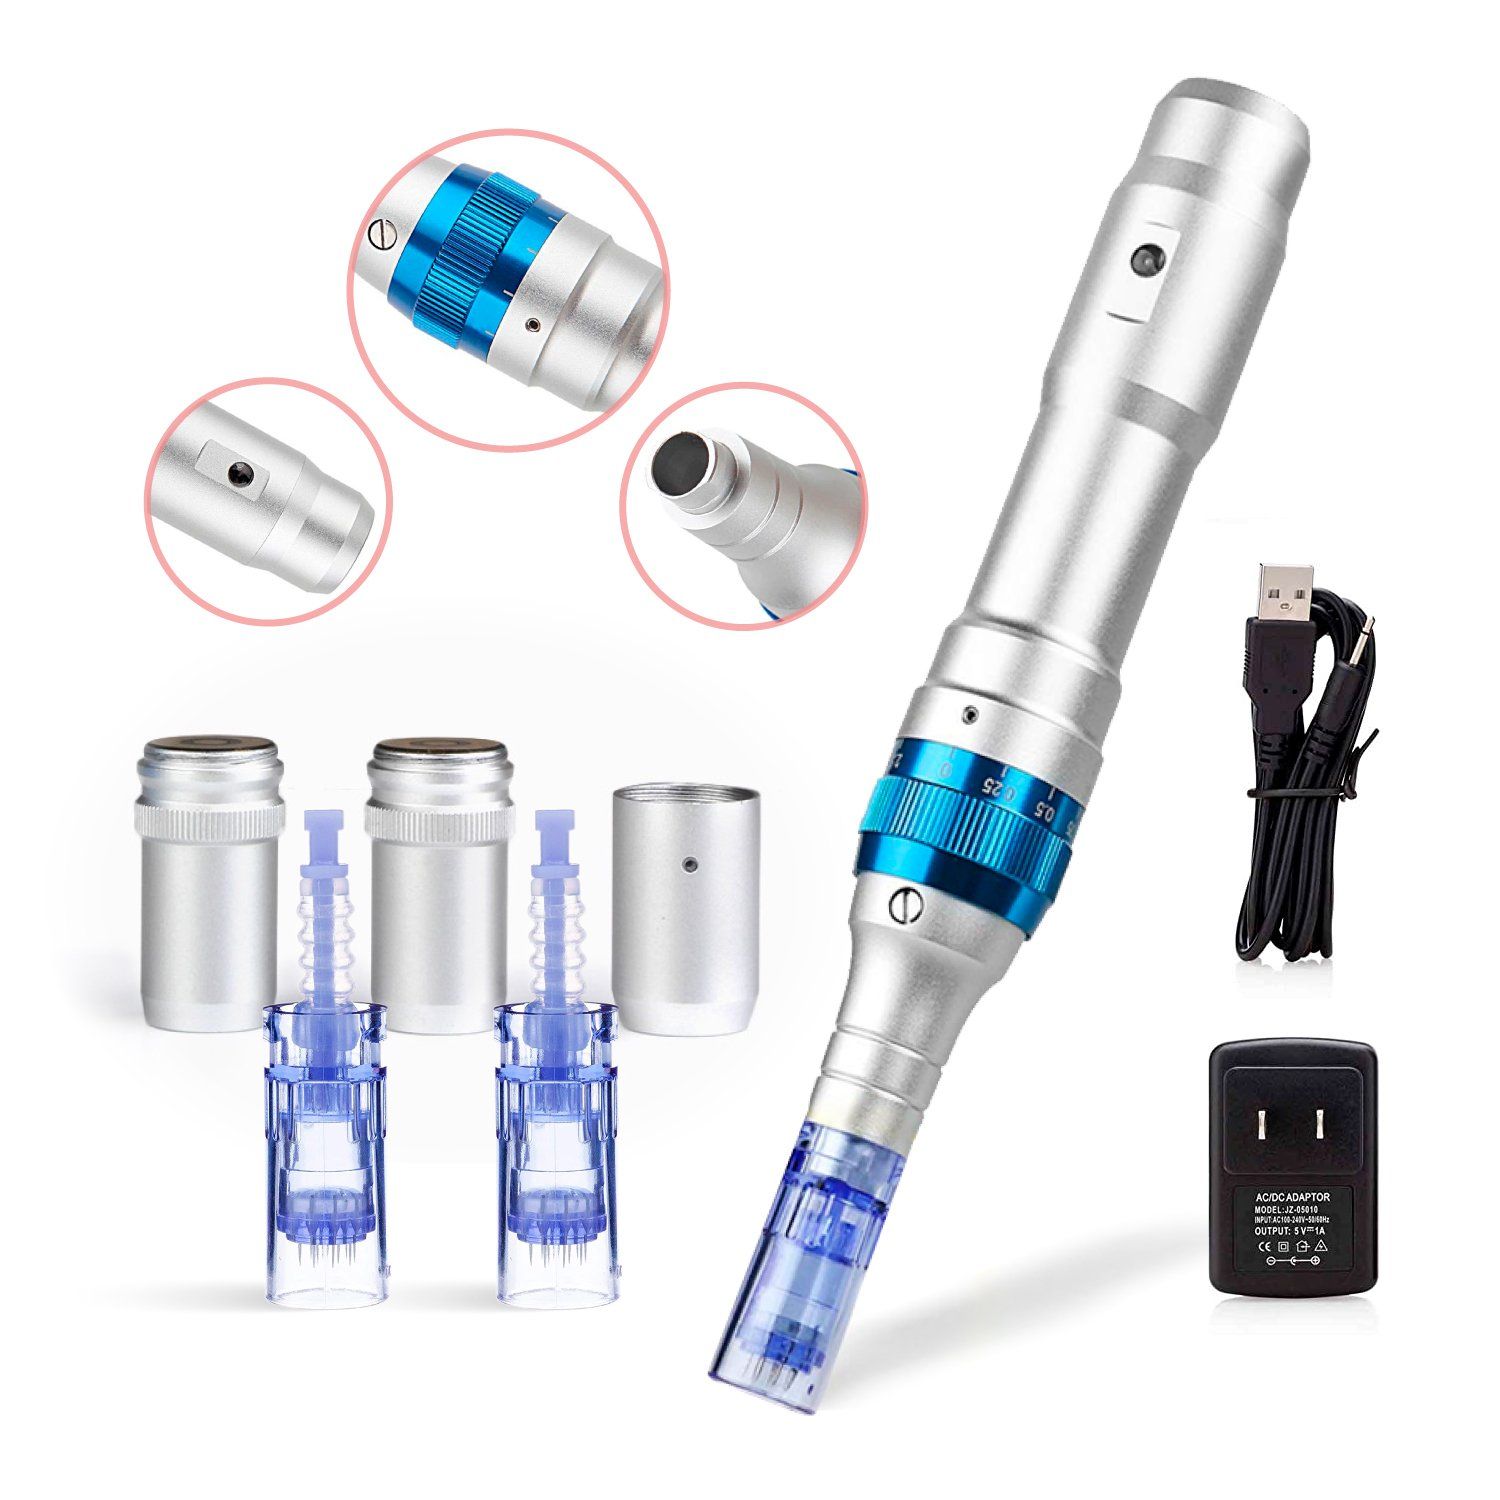 Dr. Pen Ultima A6 - Microneedling Electric Wireless Professional Skincare Kit with Cartridges - 2 X 12 pins (Maximum length of Needles 0.25mm)